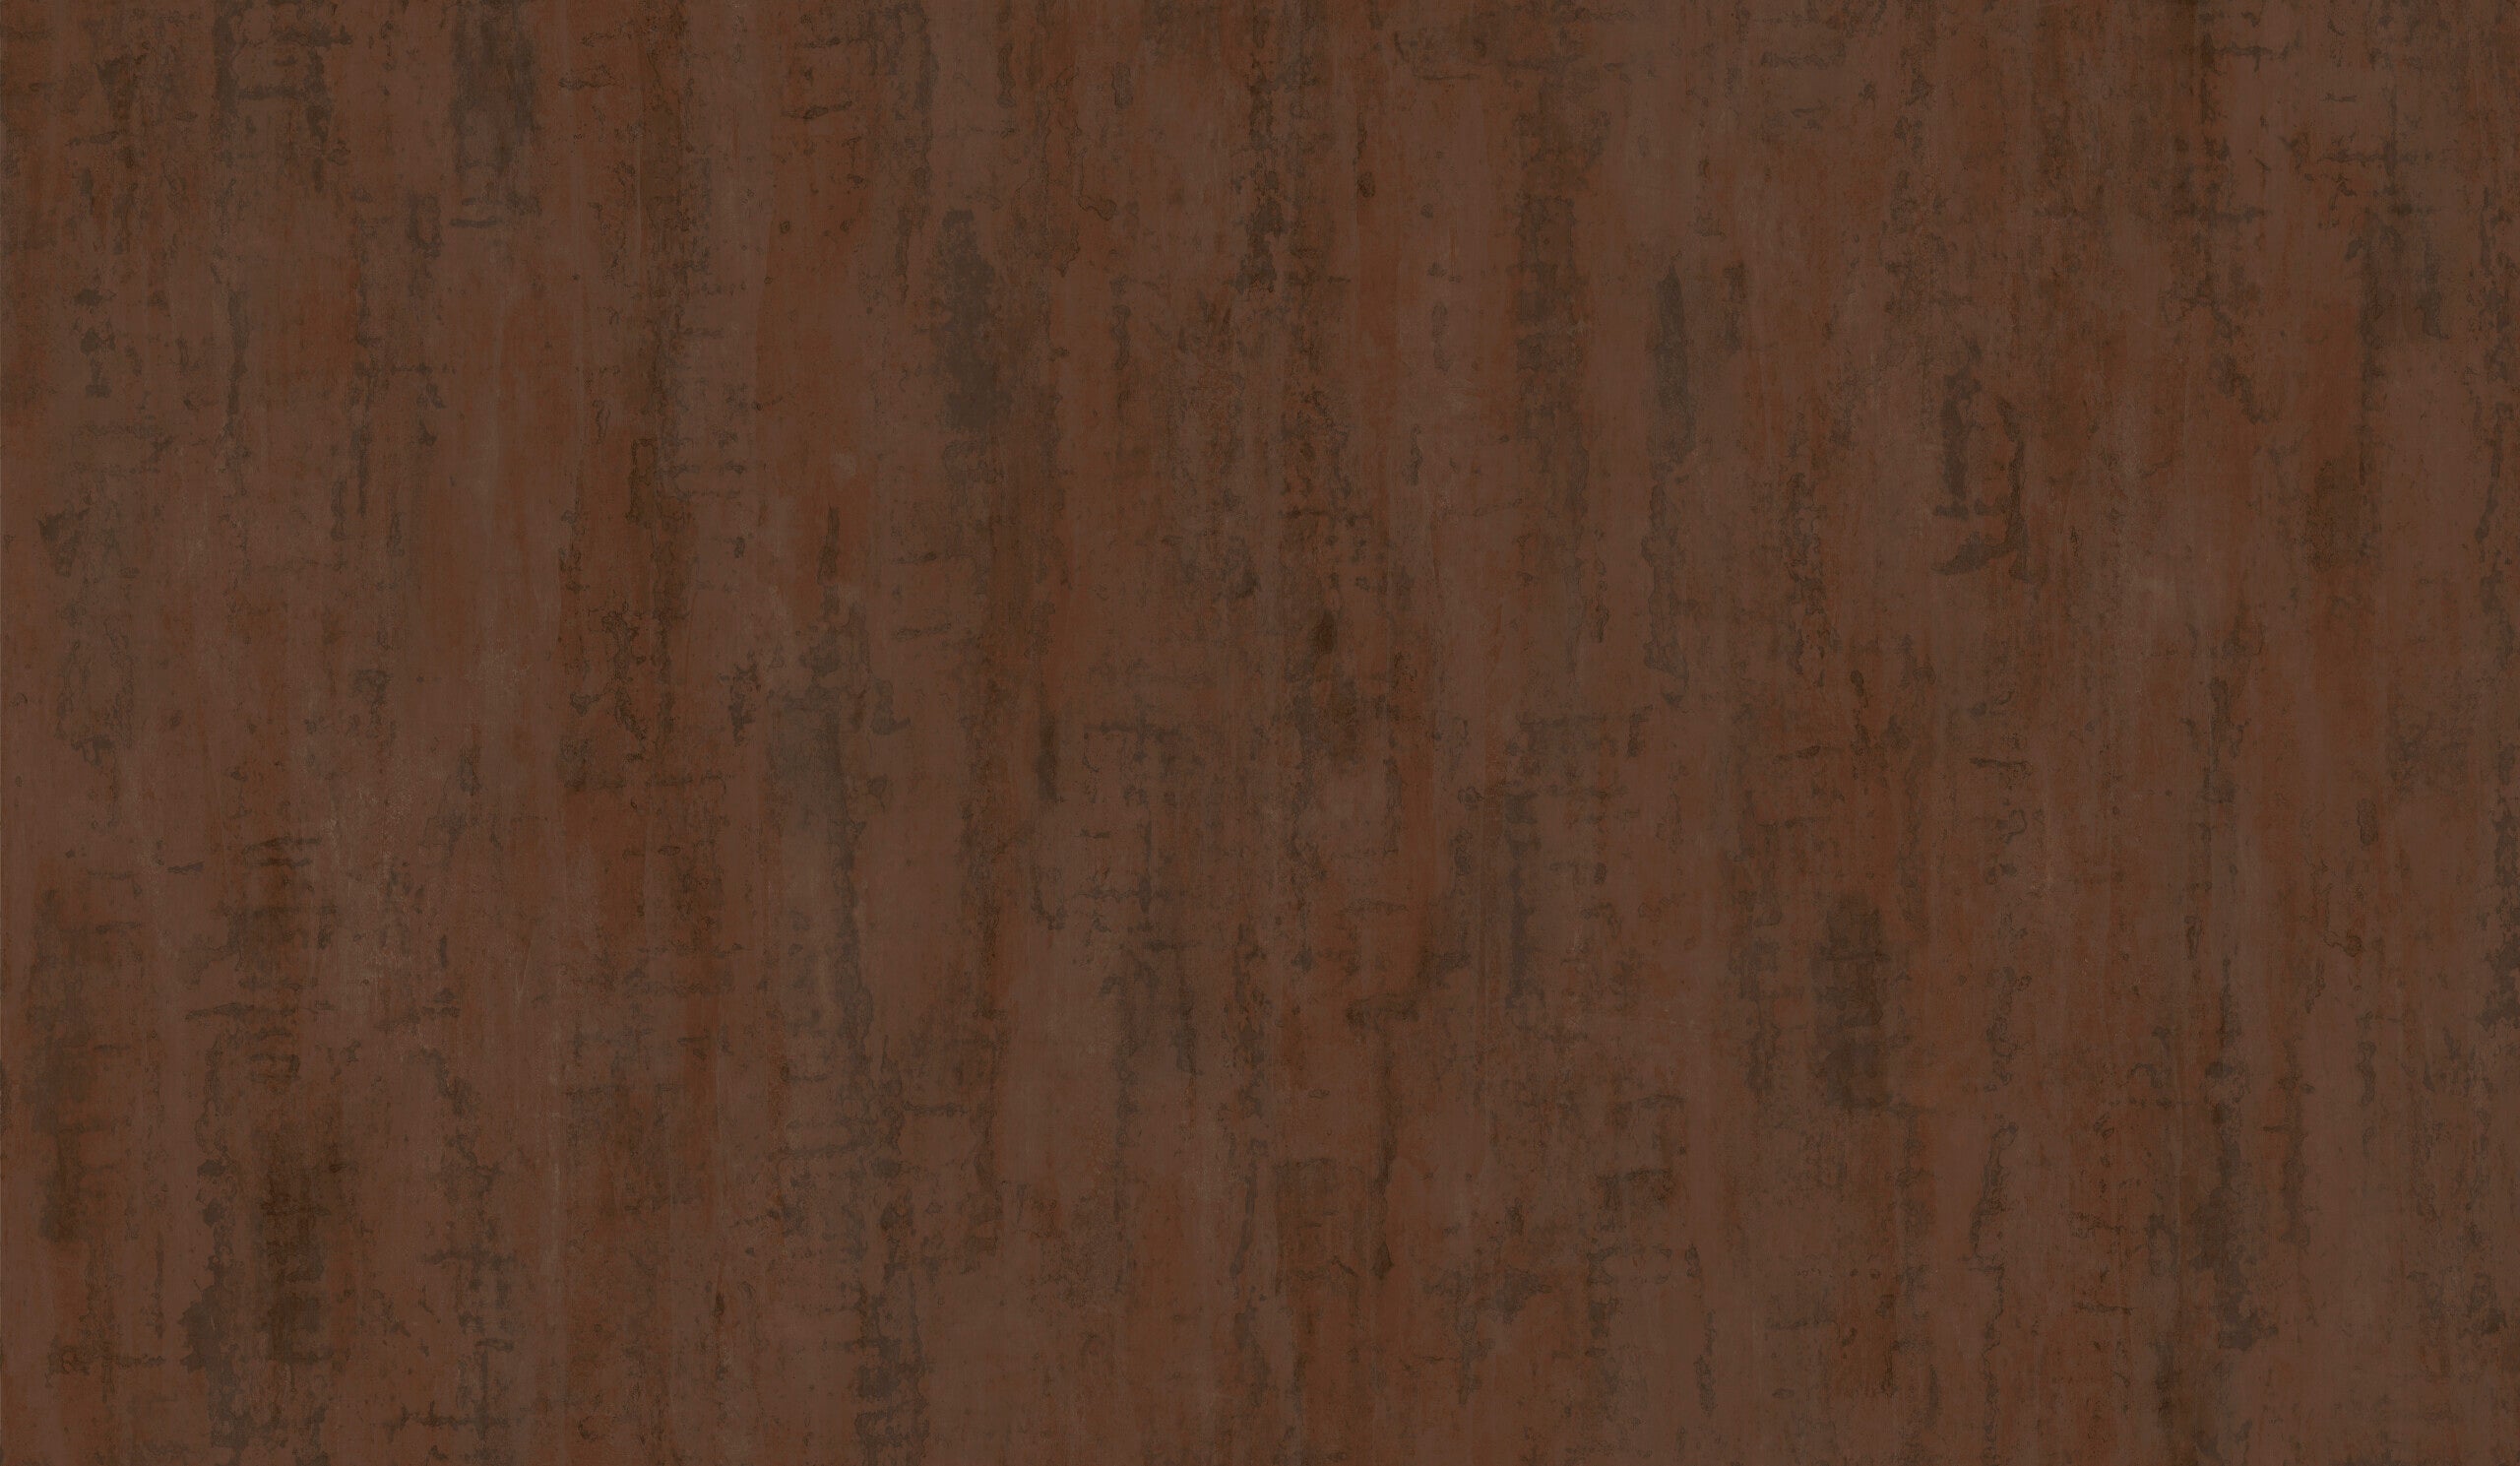 Alvic ABS Edging Metallo Brown 03 75m 1mm thick